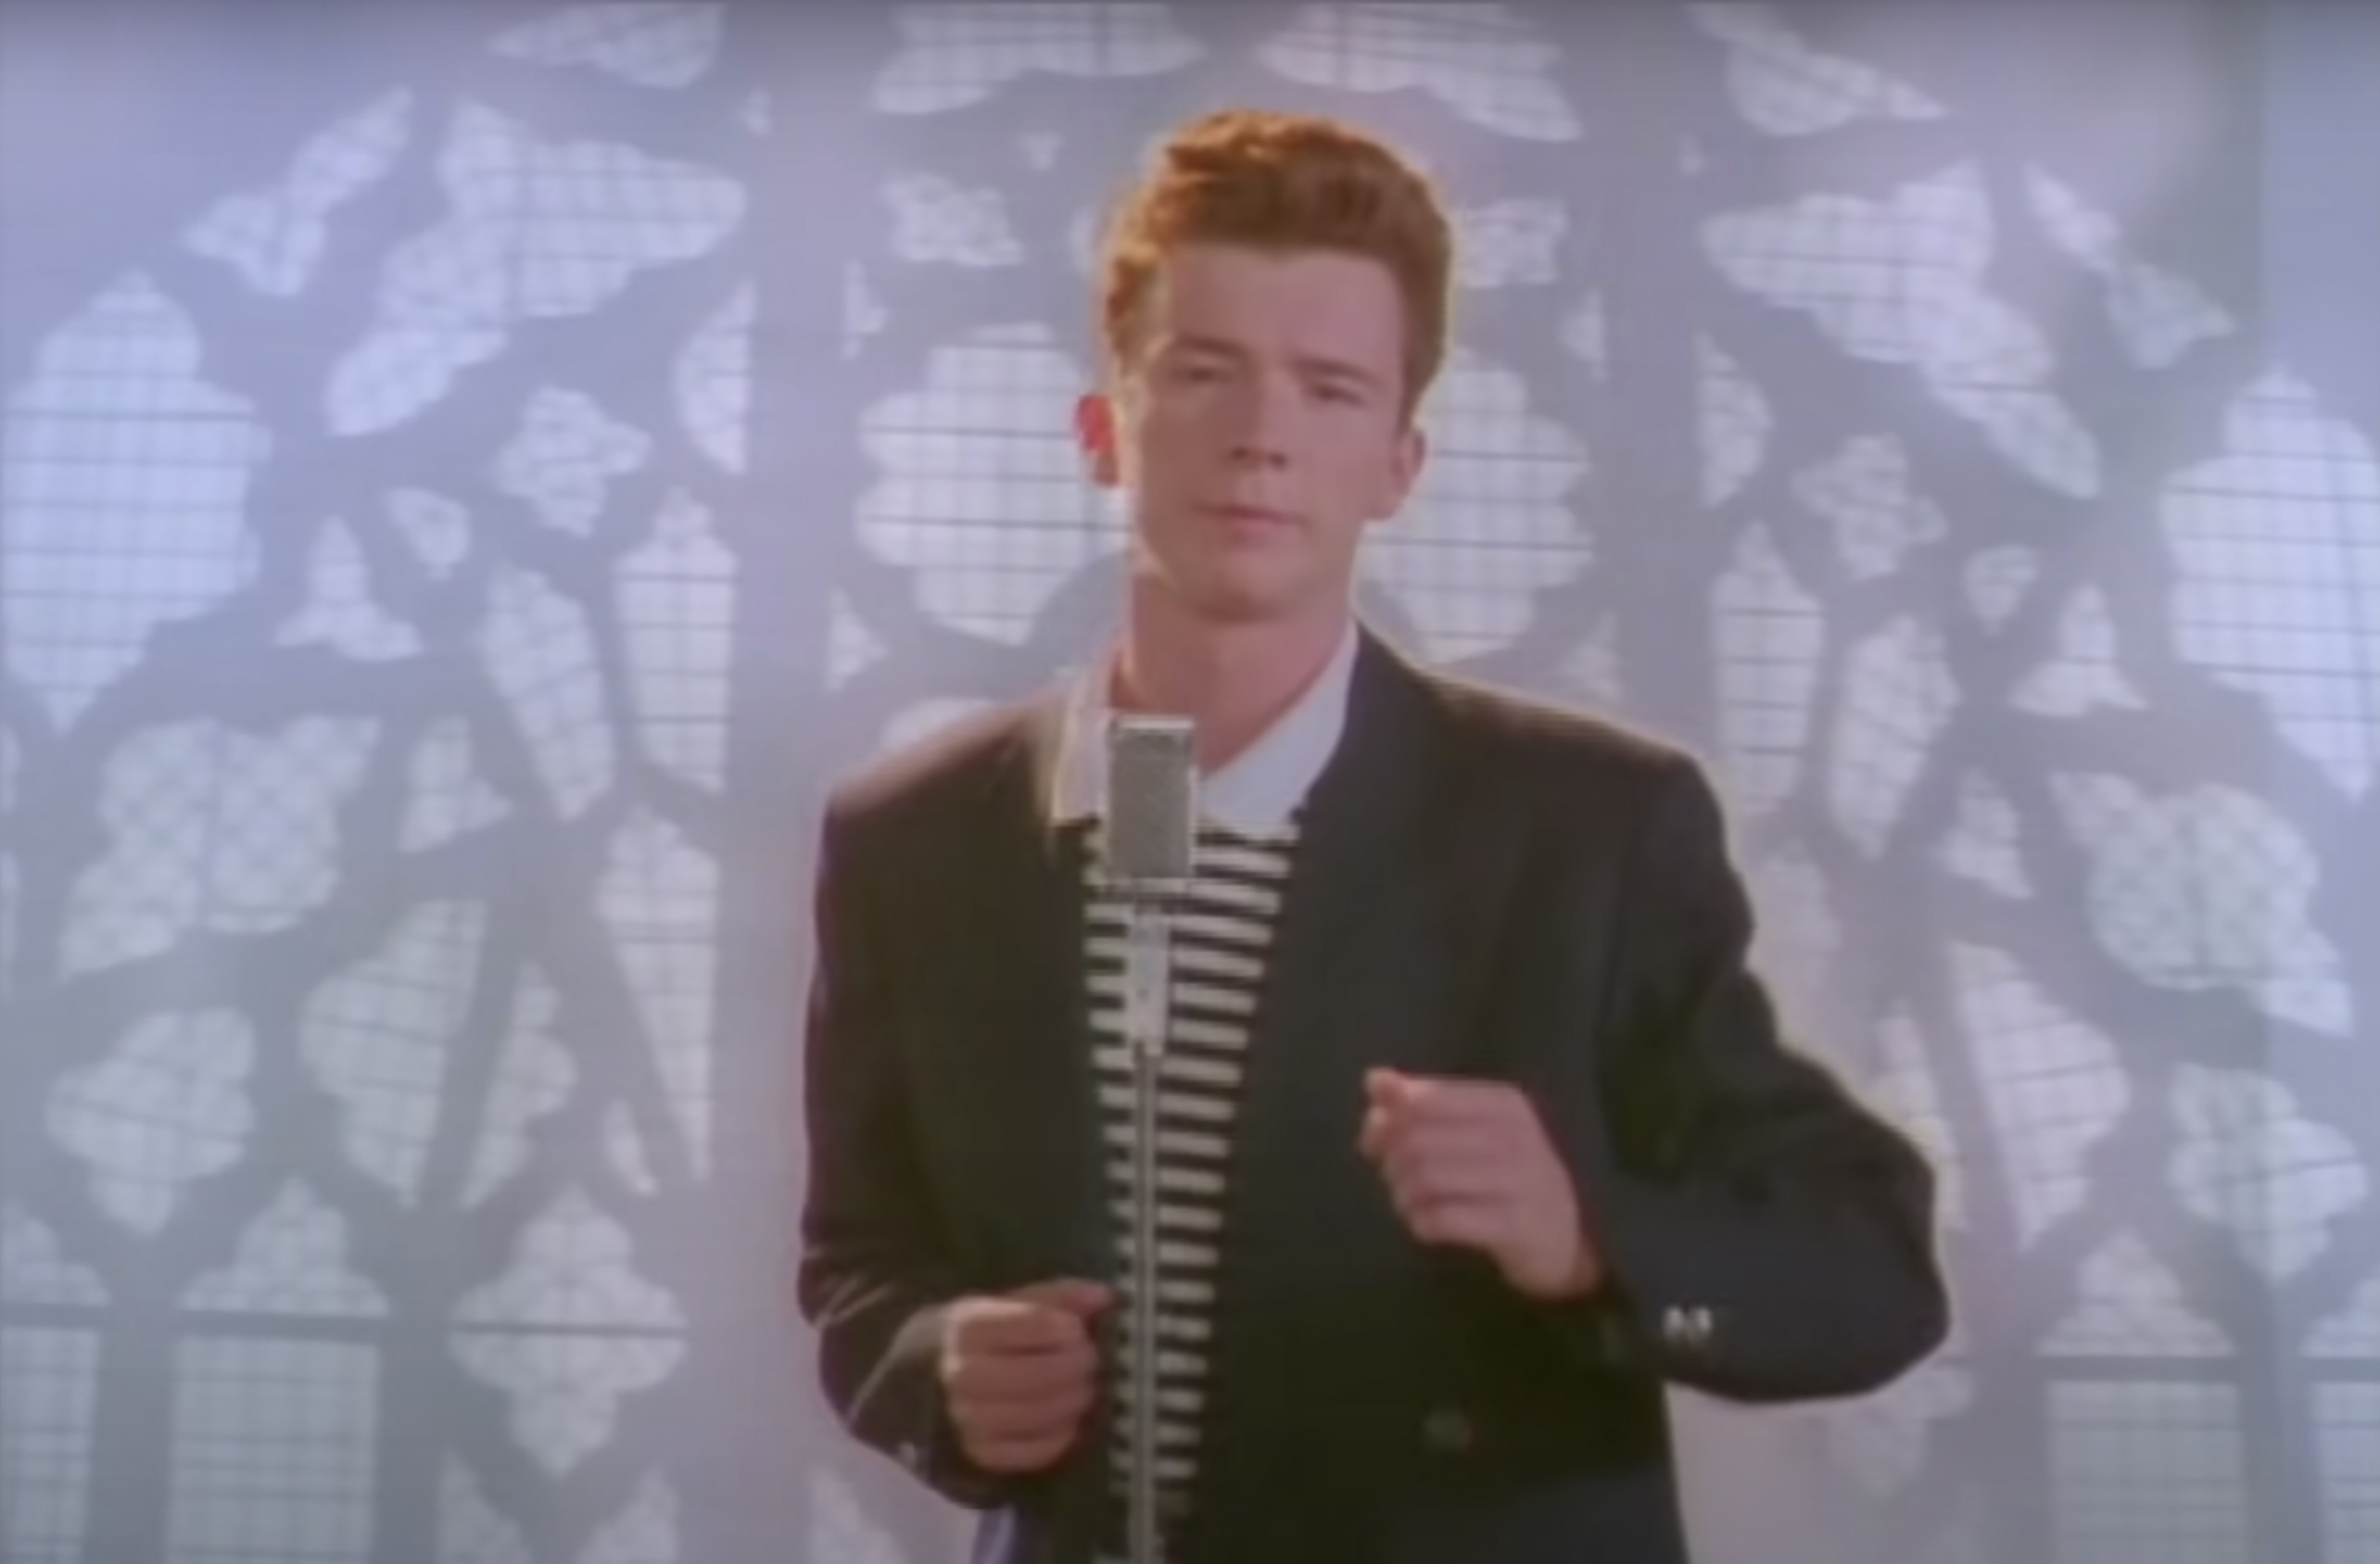 Yung Gravy Hit With Legal 'Rickrolling' By Rick Astley